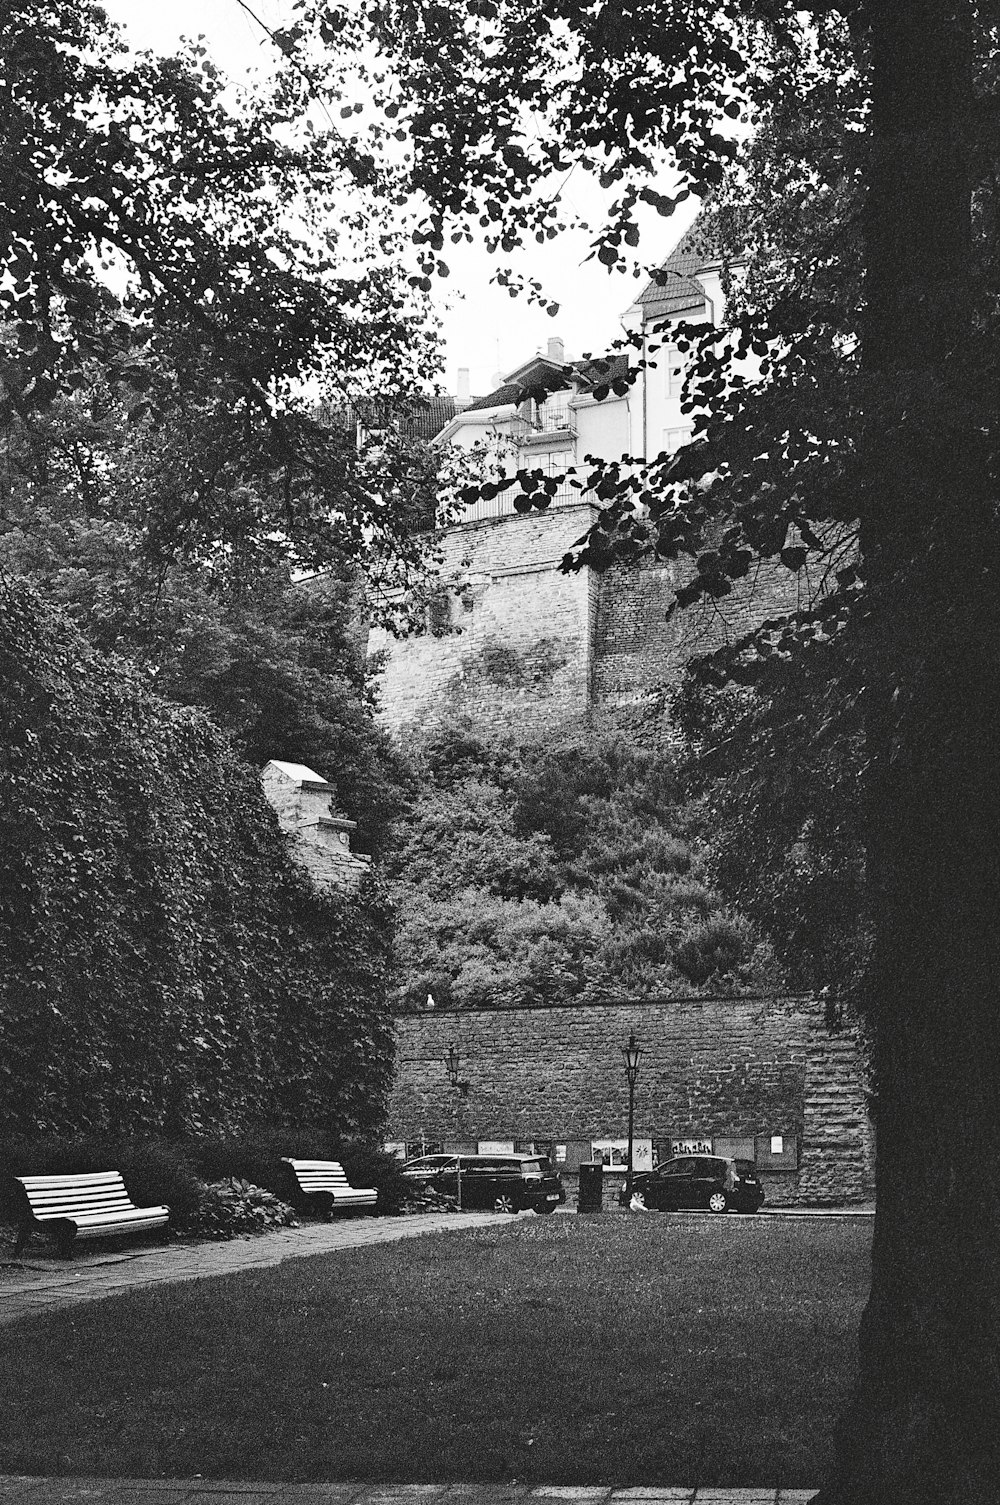 a black and white photo of a park with benches